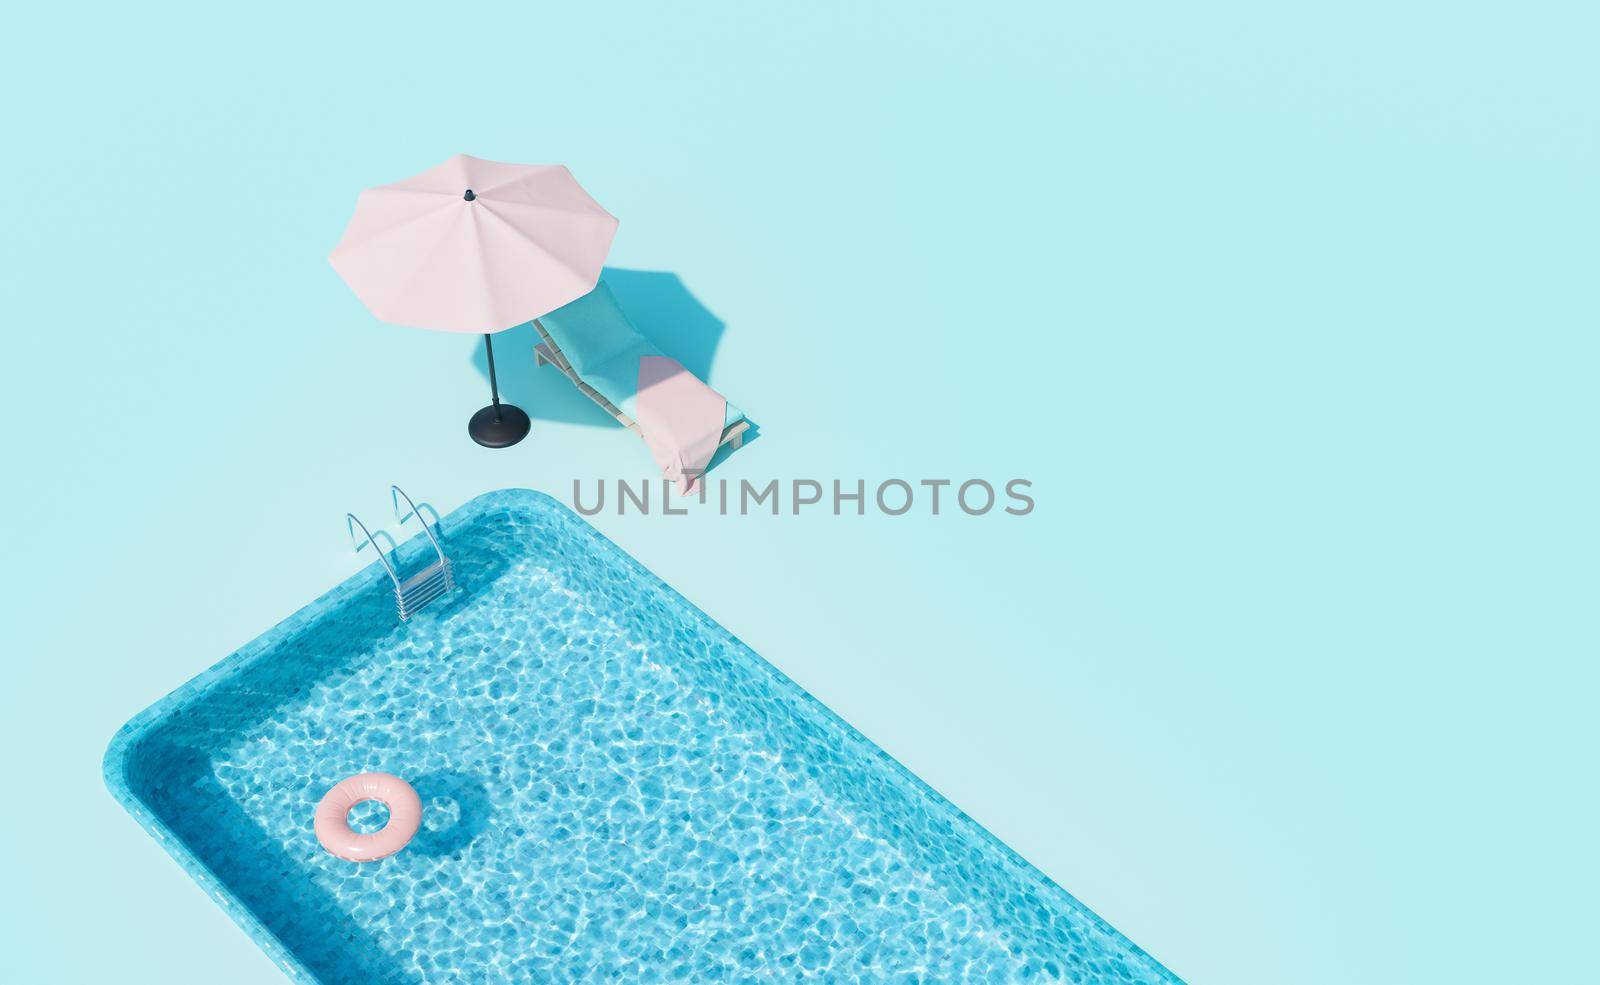 From above 3D rendering of comfortable sunbed wit umbrella placed near outdoor swimming pool with floating ring against blue background